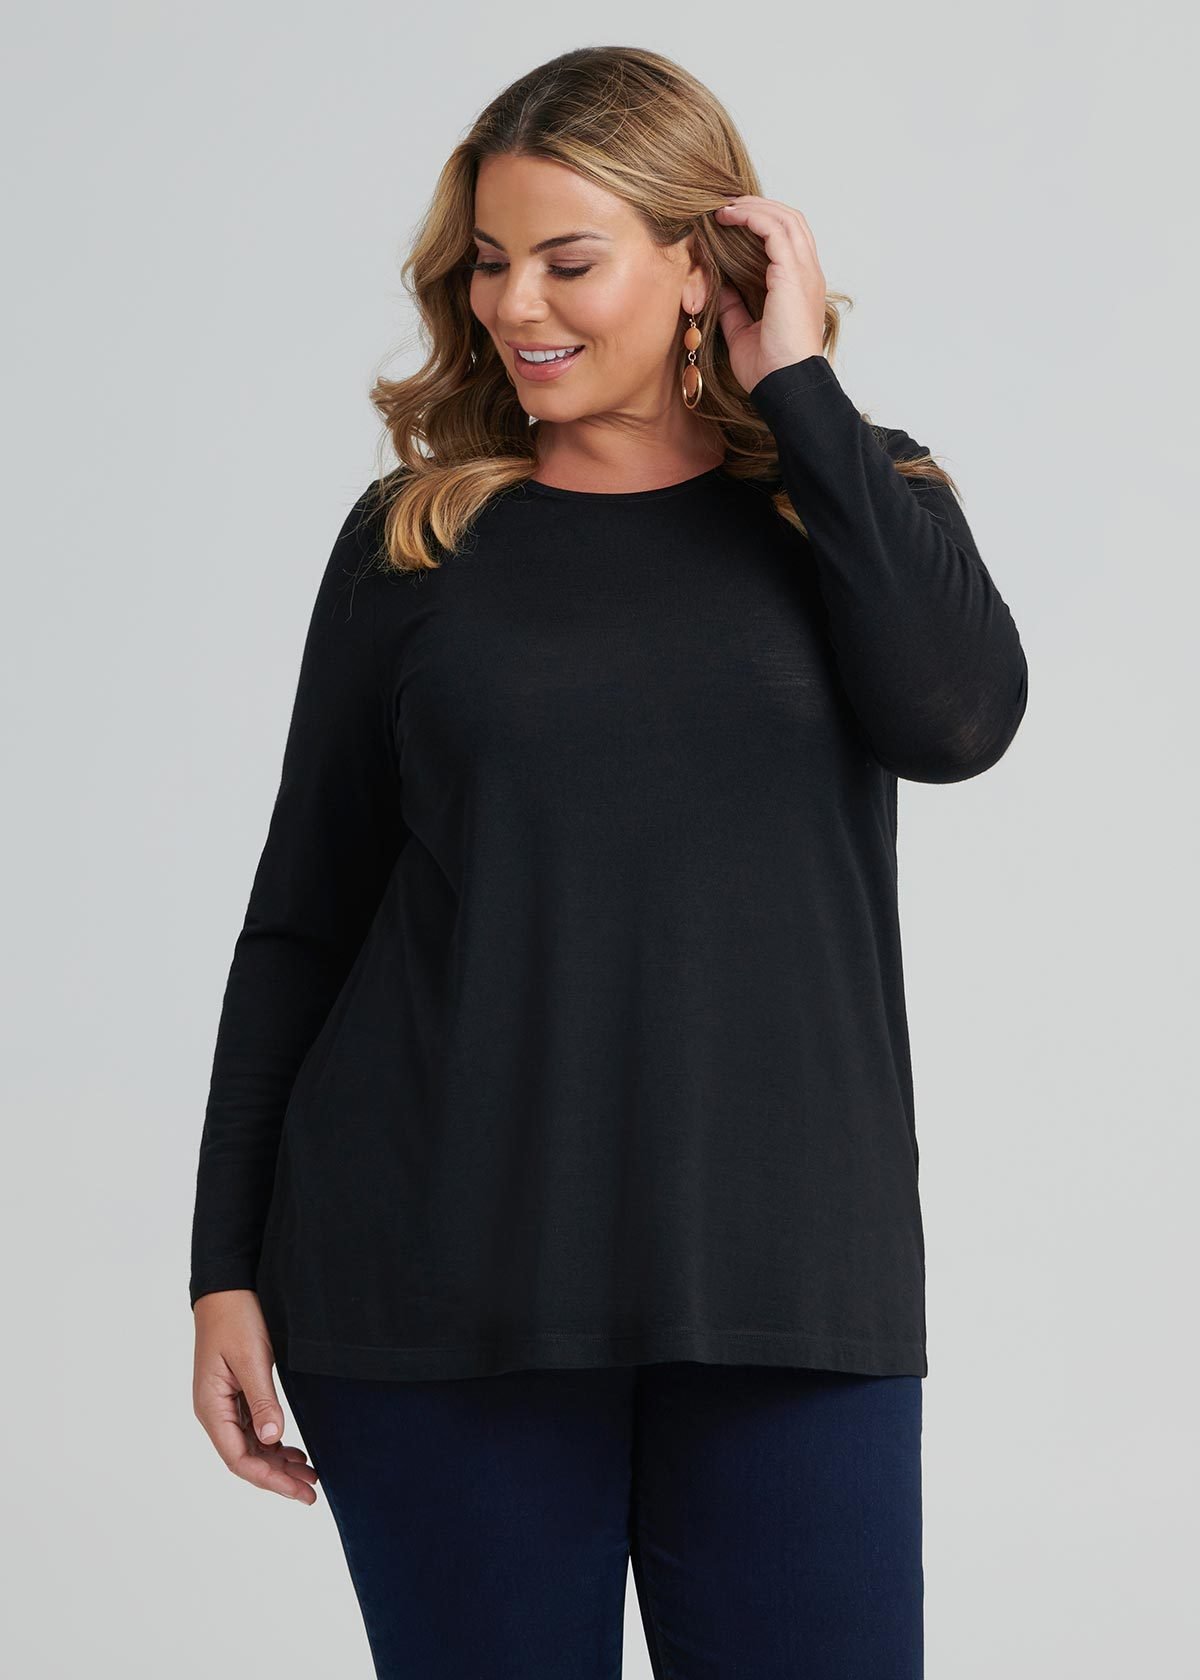 Shop Wool Bamboo Top in black in sizes 12 to 24 | Taking Shape